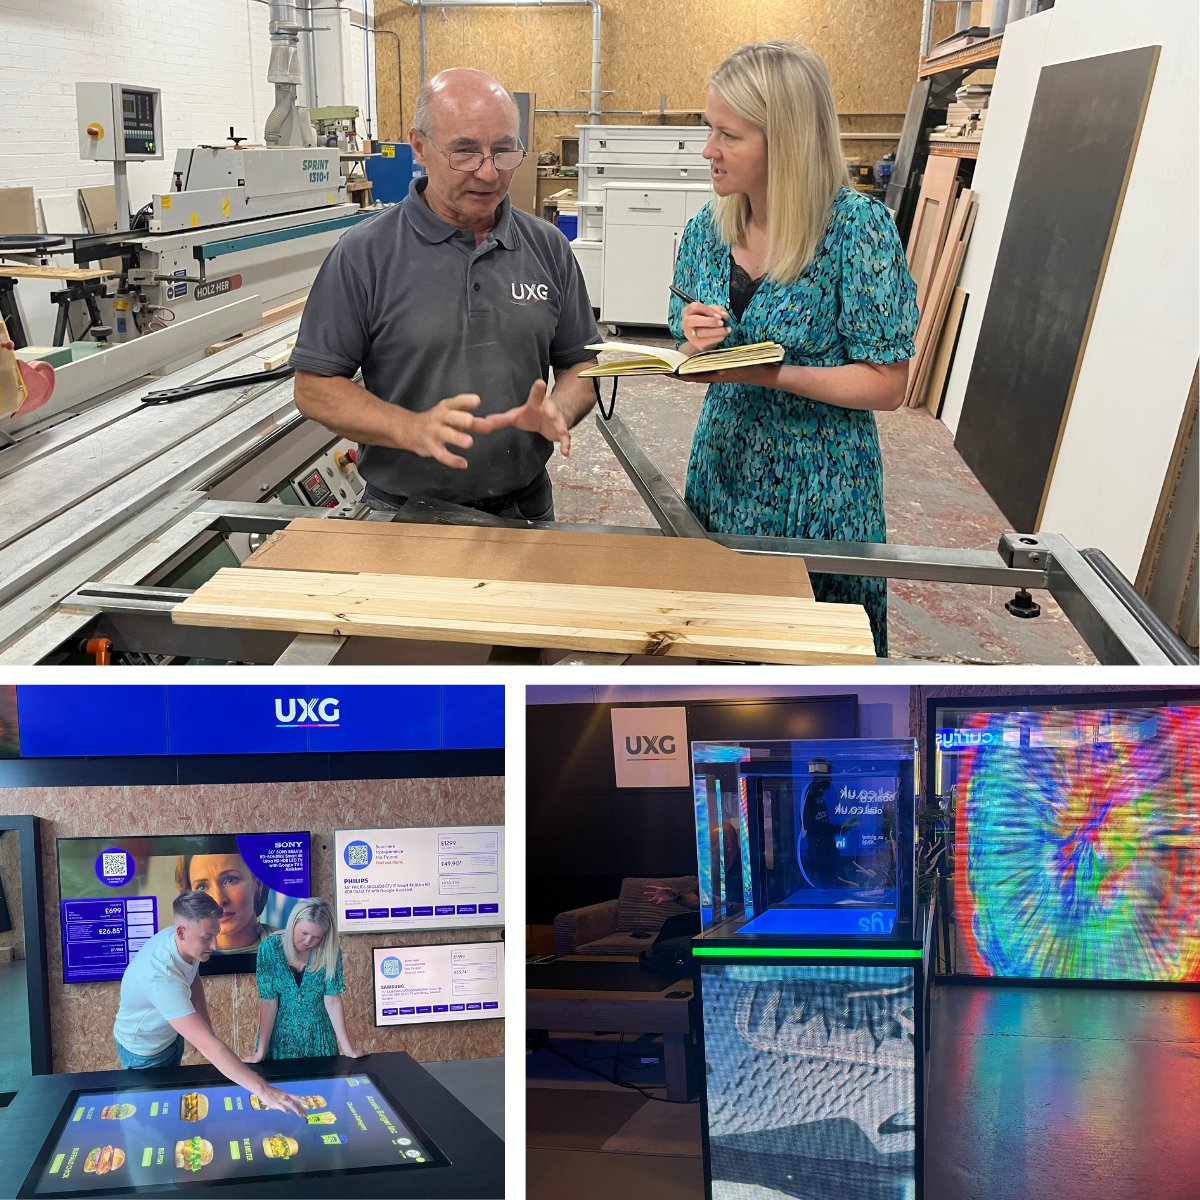 Our Director @joanne_parker at our client @ux_global's HQ earlier this week gathering insight into their #digitaldisplay solutions for our ongoing #B2Bmarketing work...